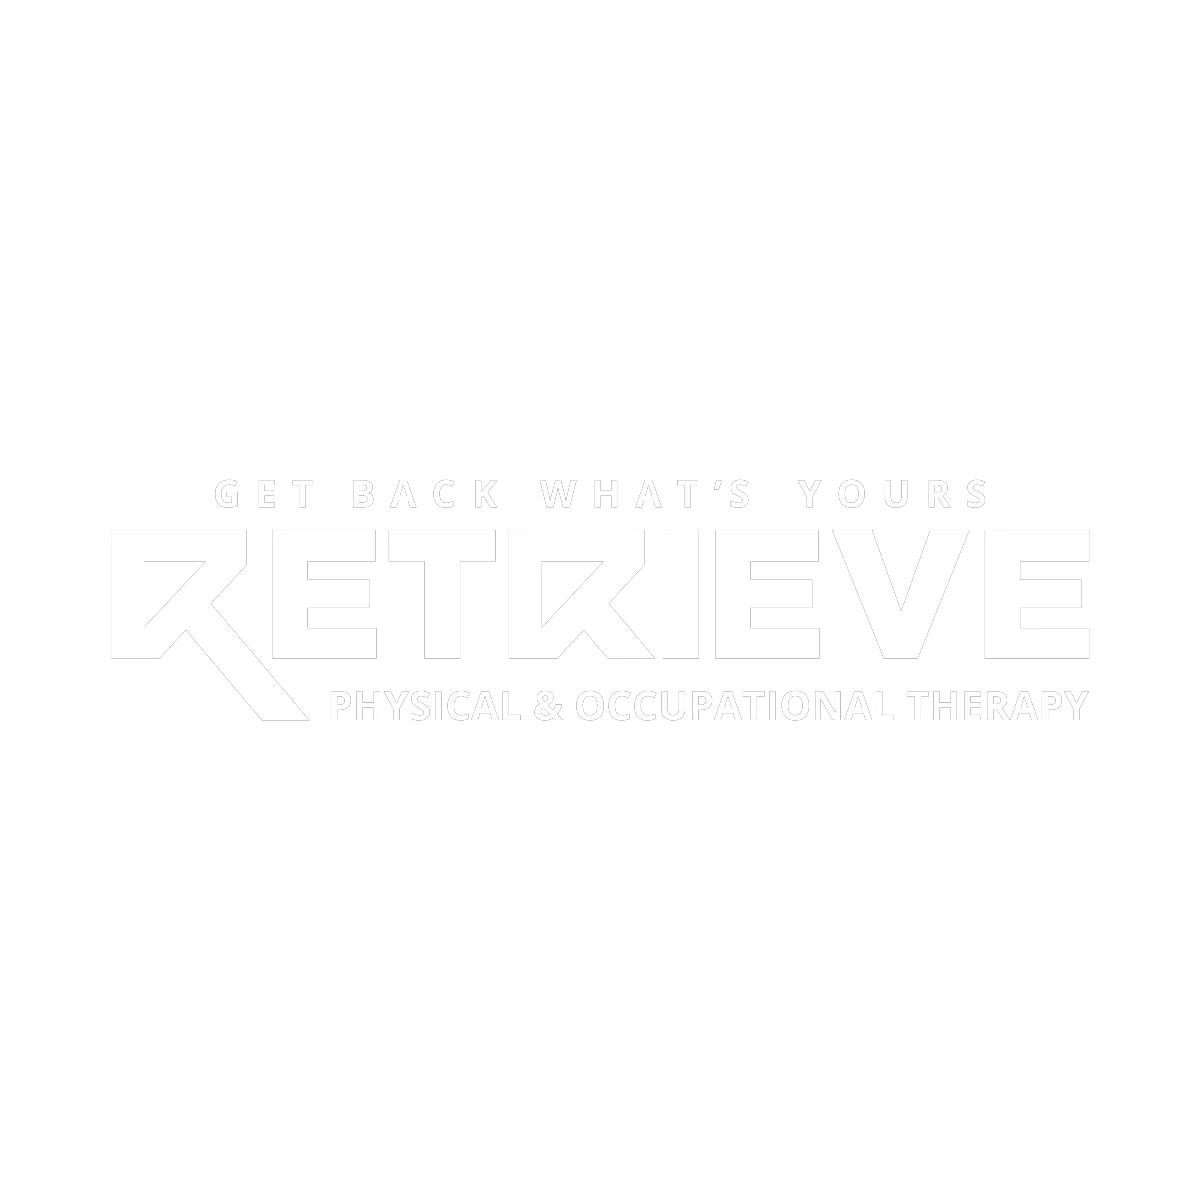 Retrieve Physical & Occupational Therapy, Best physical therapist in Rochester